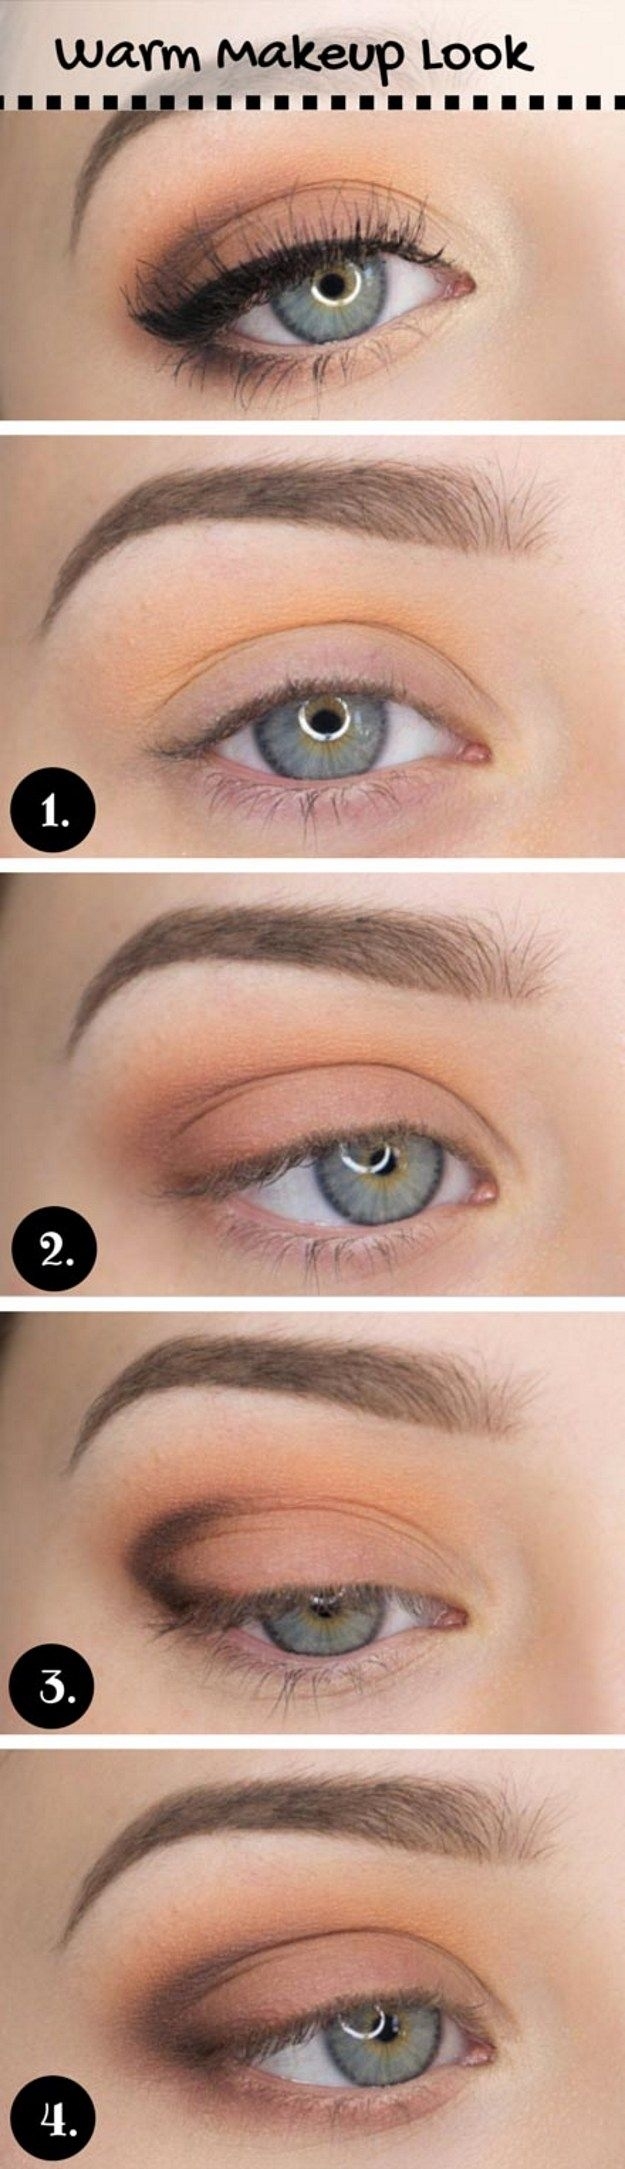 Lovely Makeup Tutorials For Blue Eyes | Natural Makeup | Pinterest with regard to Everyday Makeup Tutorial Blue Eyes